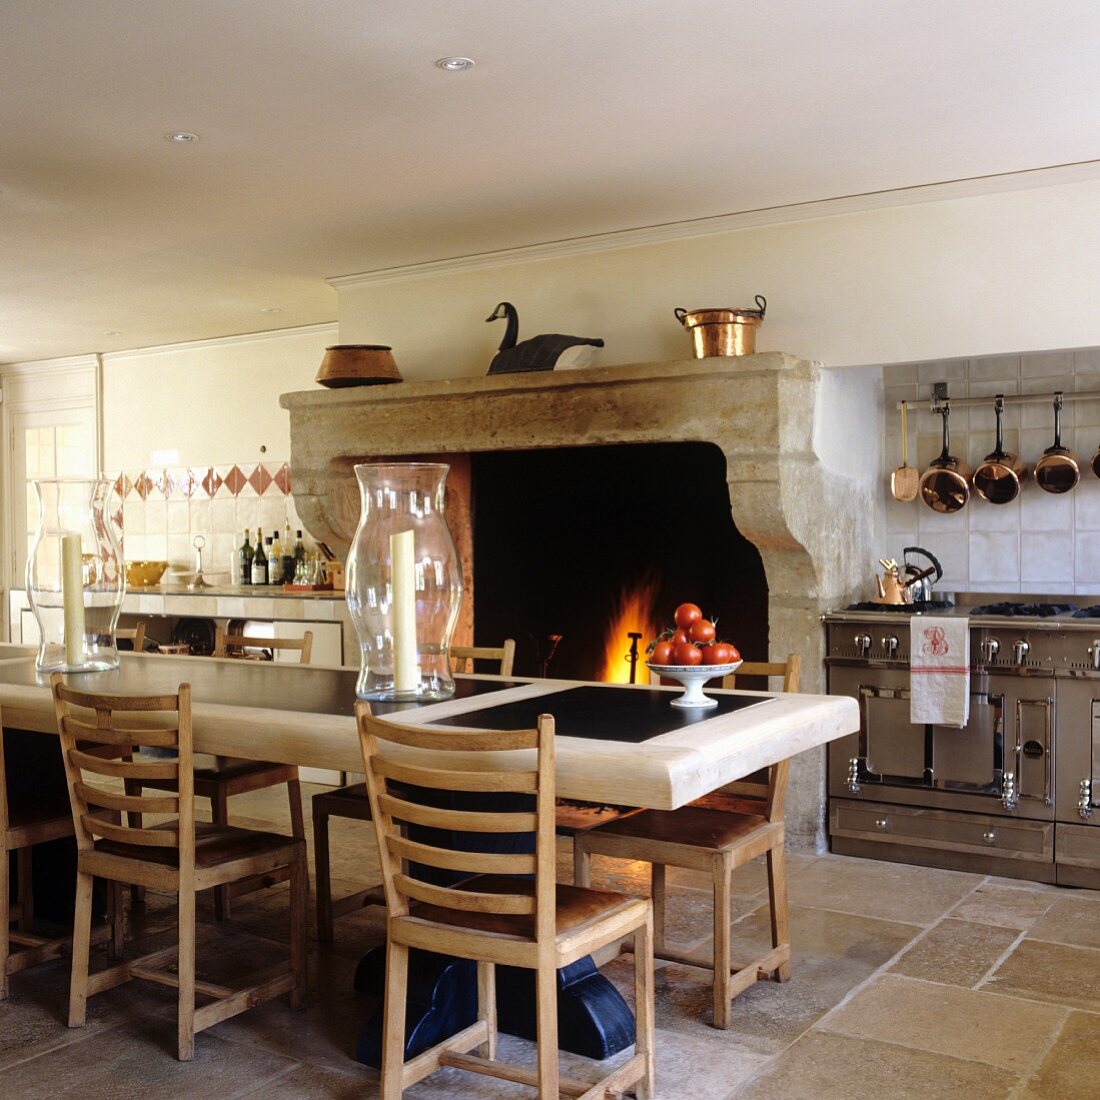 Vintage kitchen with dining table in front of open fireplace in Mediterranean country house